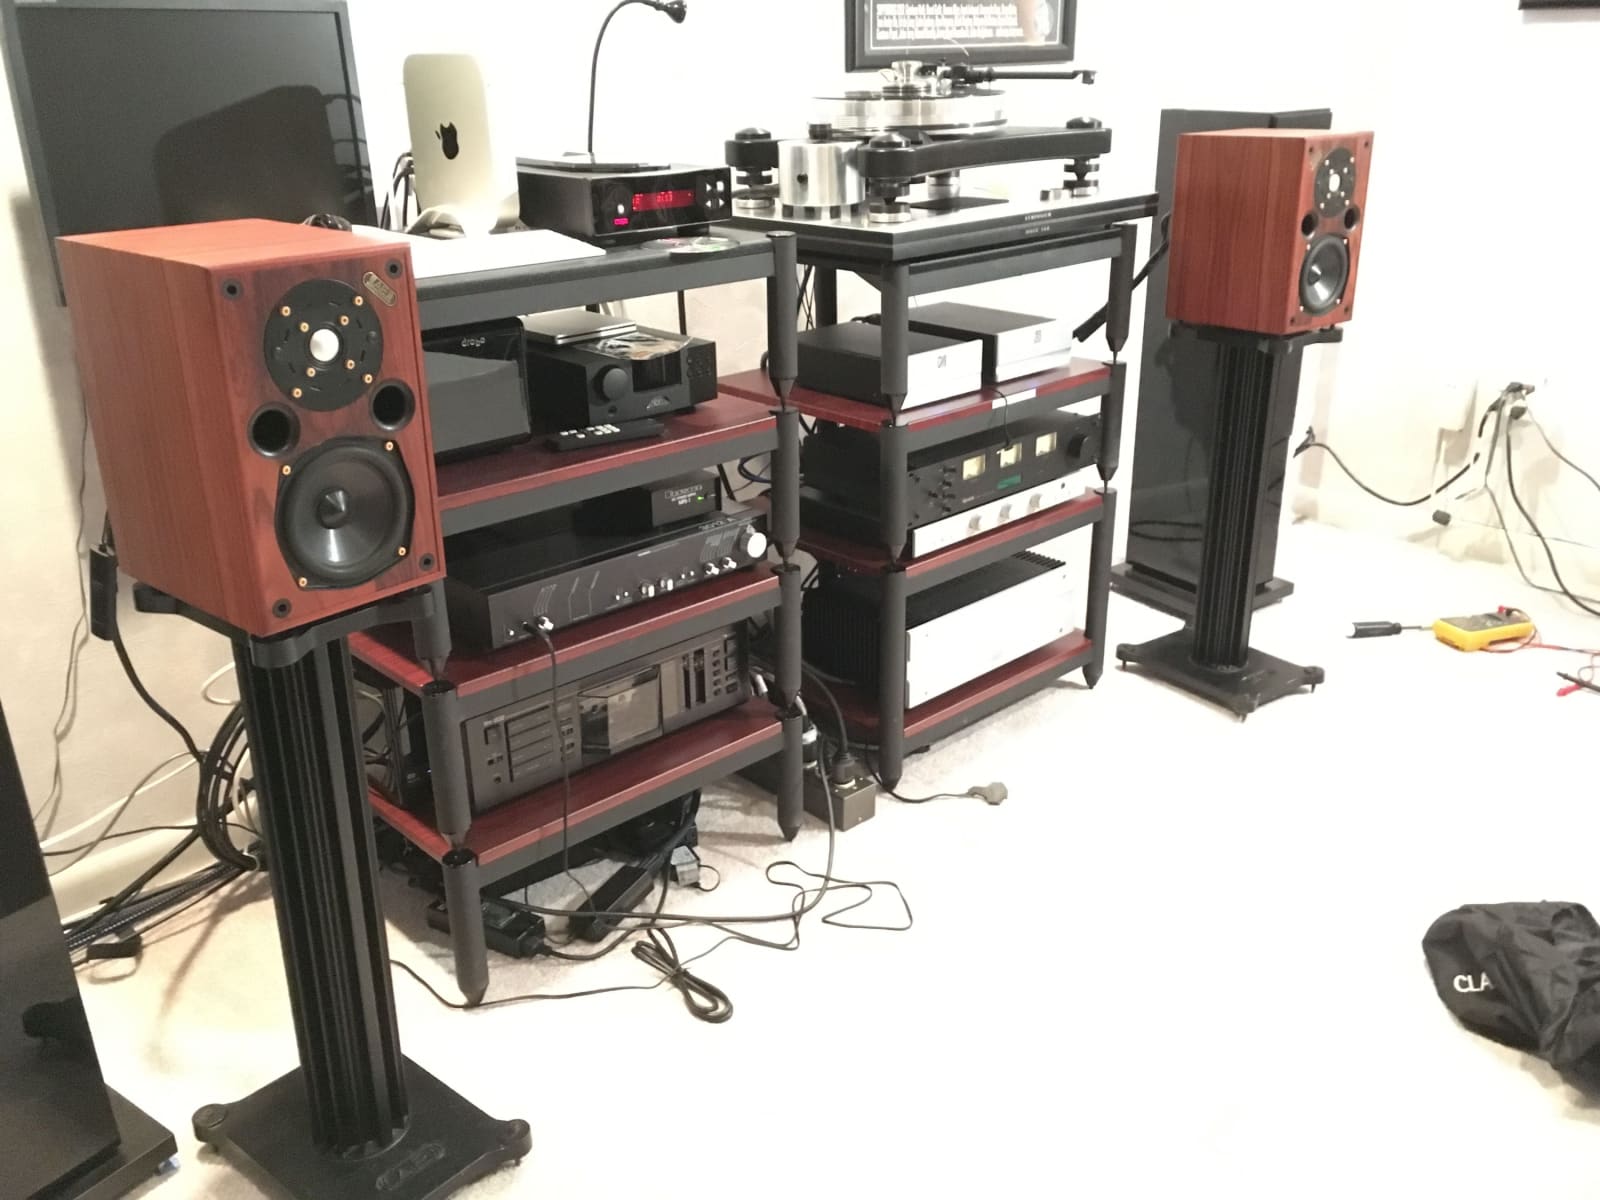 Acoustic Energy Ae-1 Speakers With Matching Stands